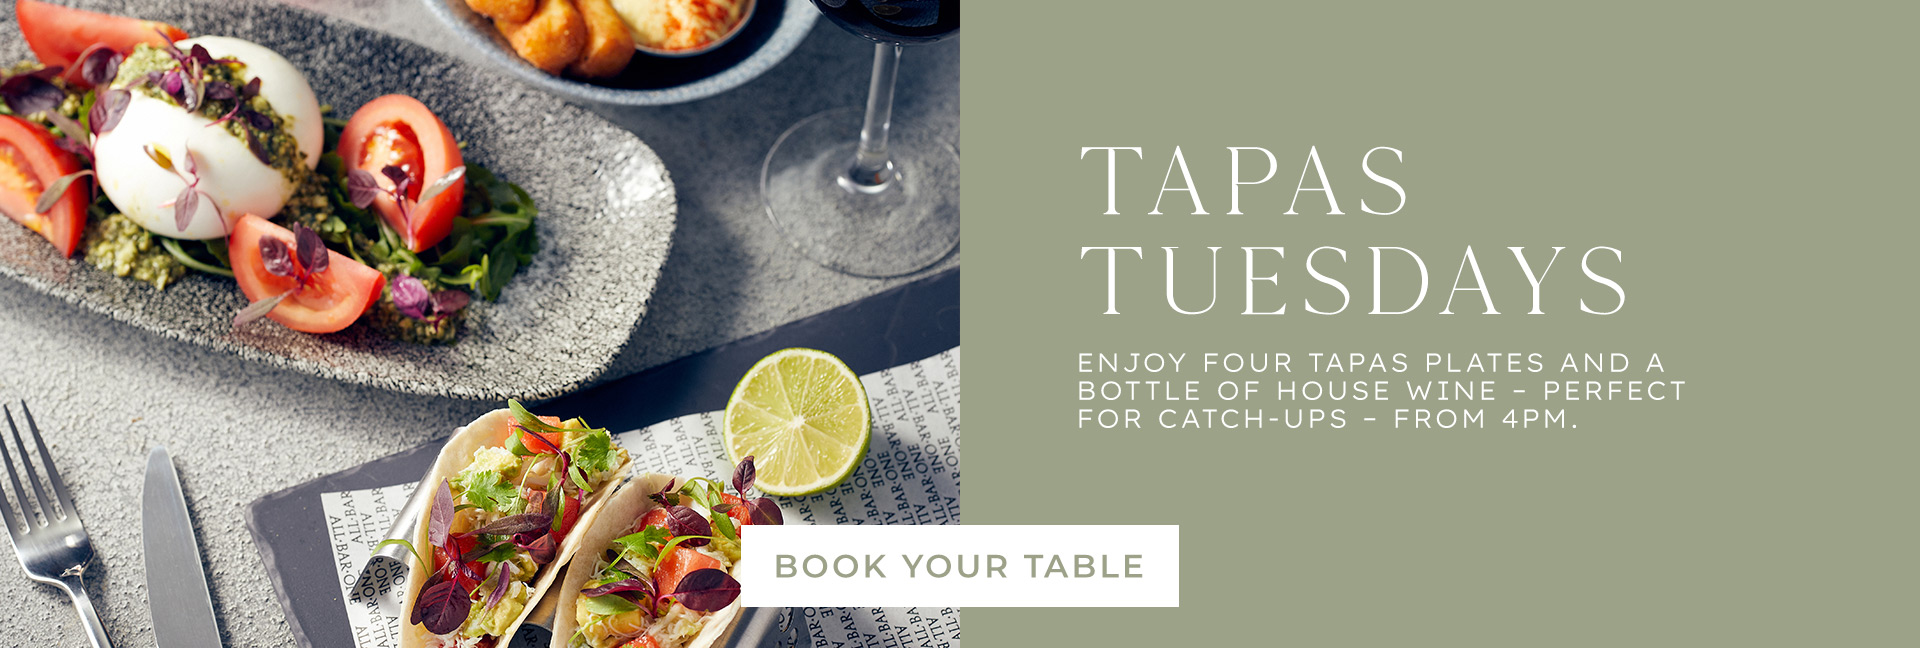 Tapas Tuesday at All Bar One Chester - Book now